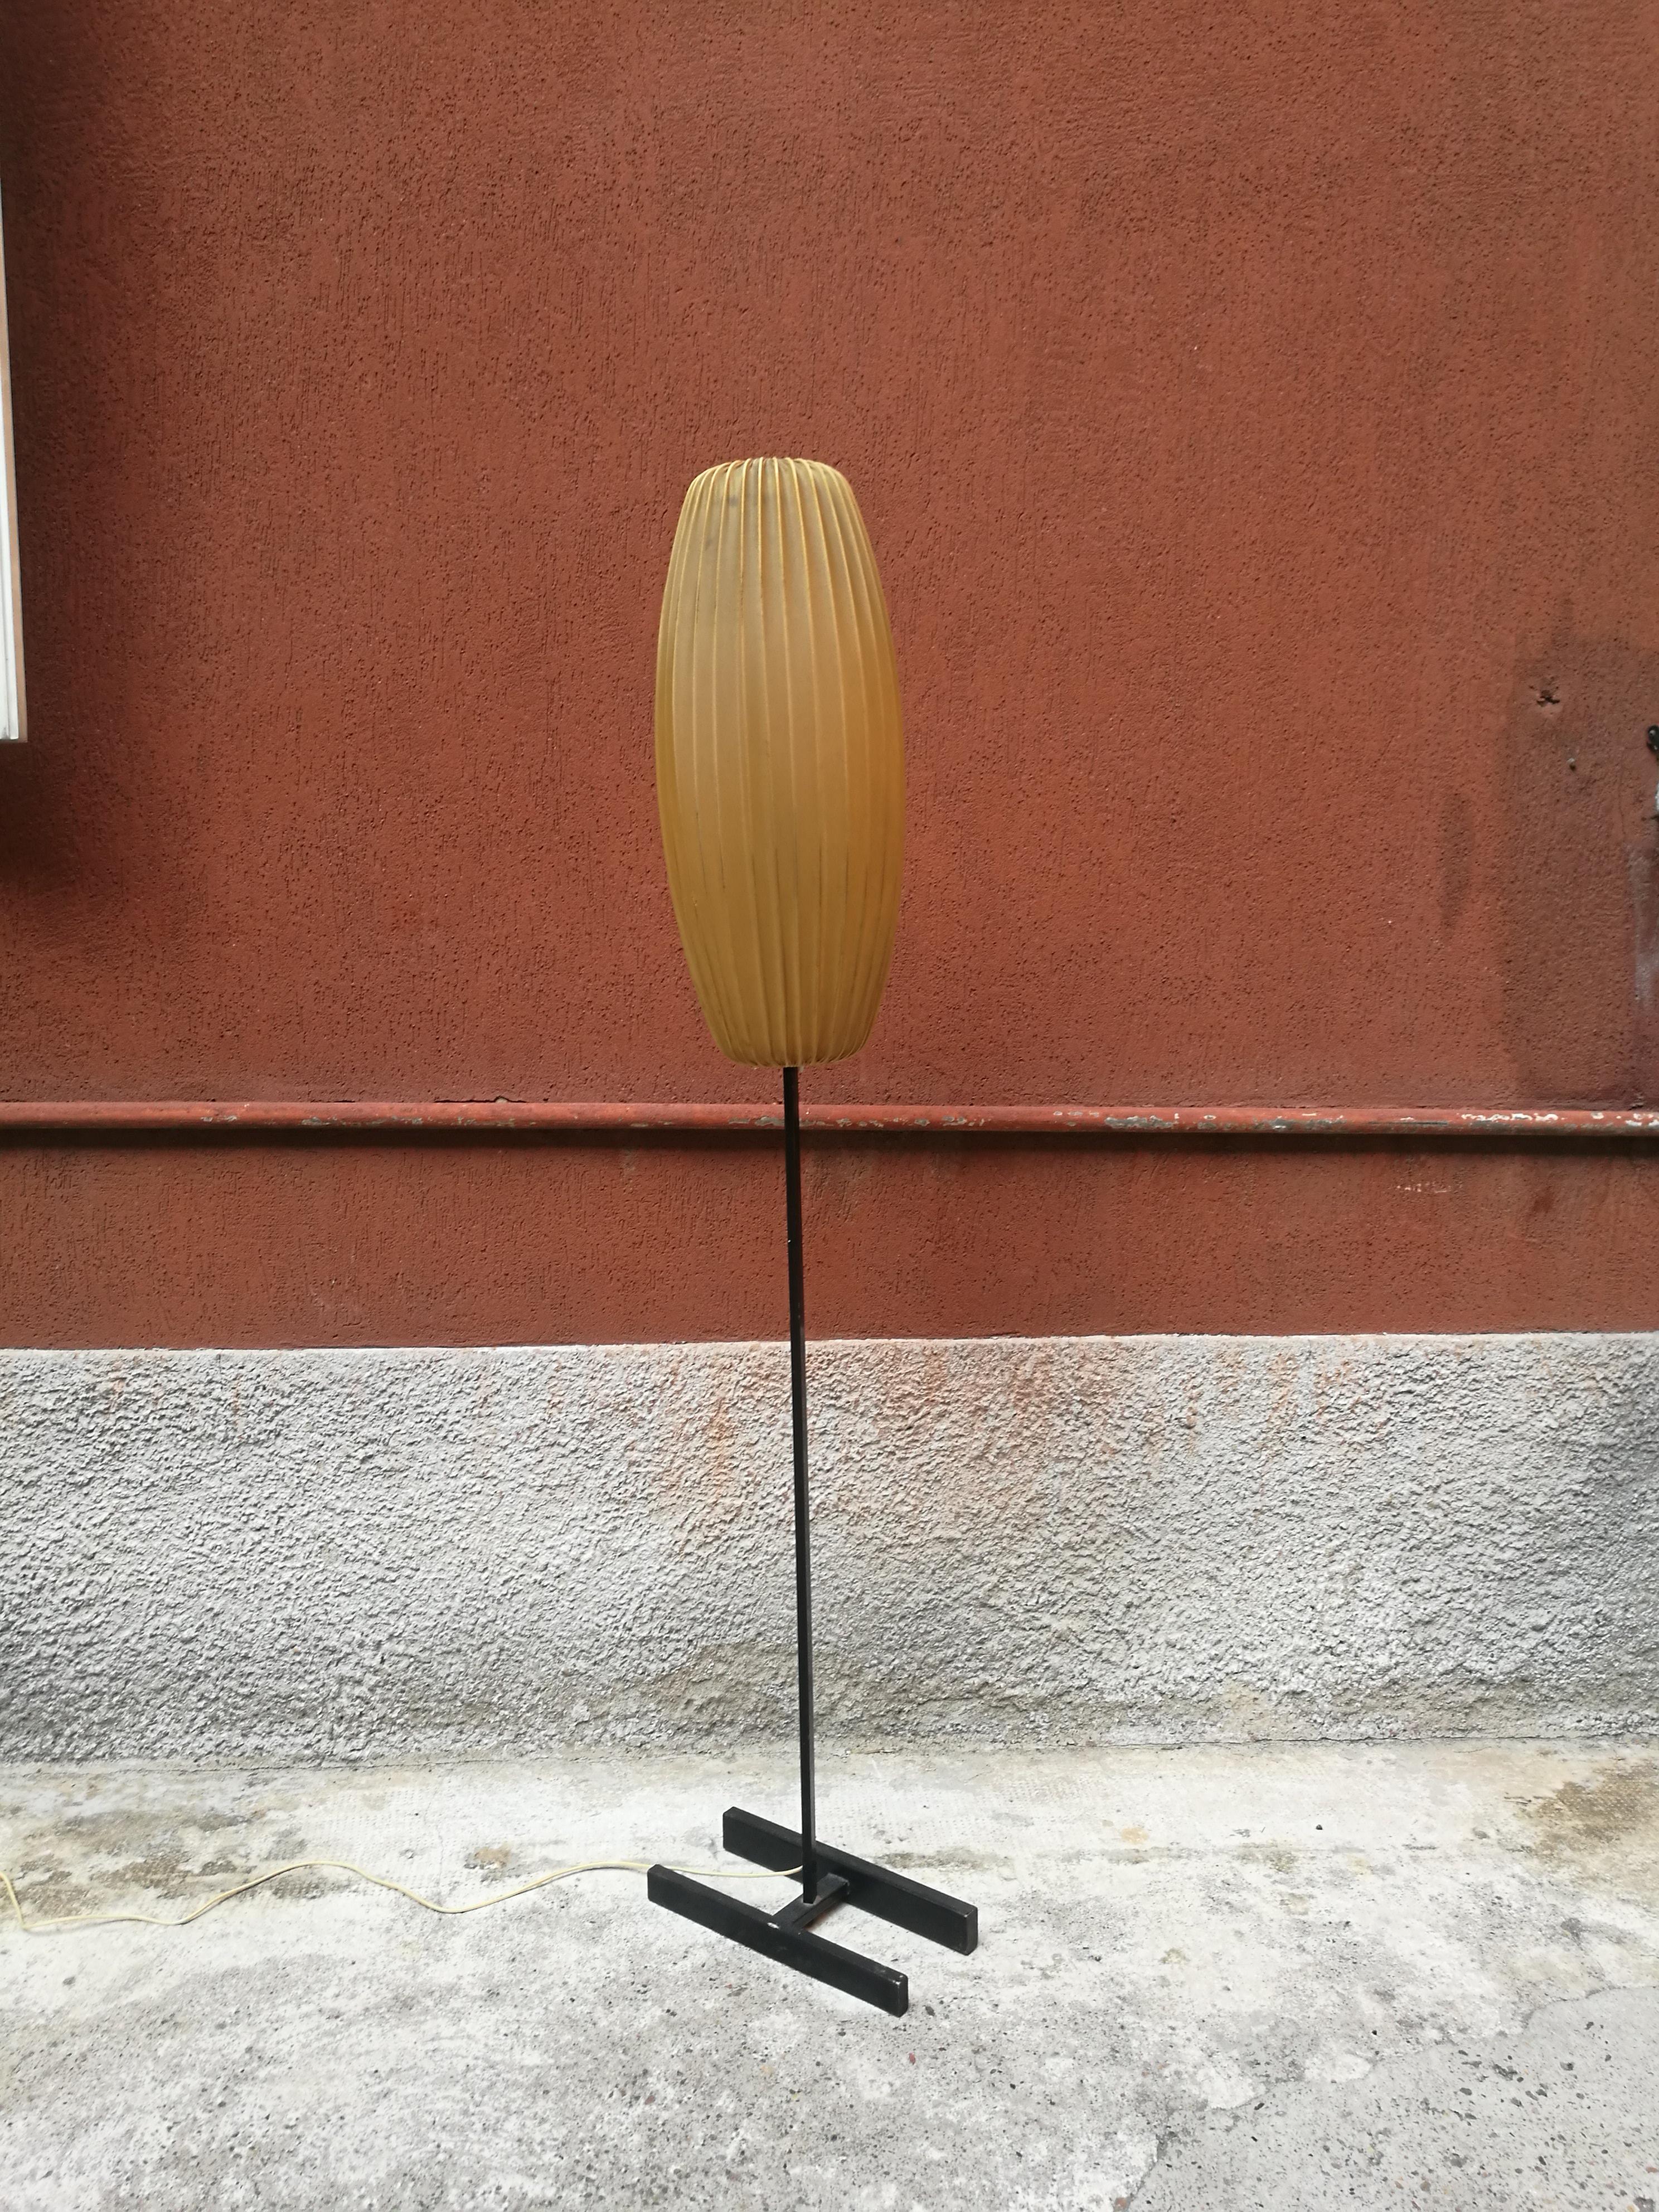 Italian cocoon floor lamp with black metal base from 1950s
Italian floor lamp from 1950s, with an oval cocoon diffuser and a black metal basement. The resin of the diffuser has got a wonderful color and patina, has no scratches and damages and